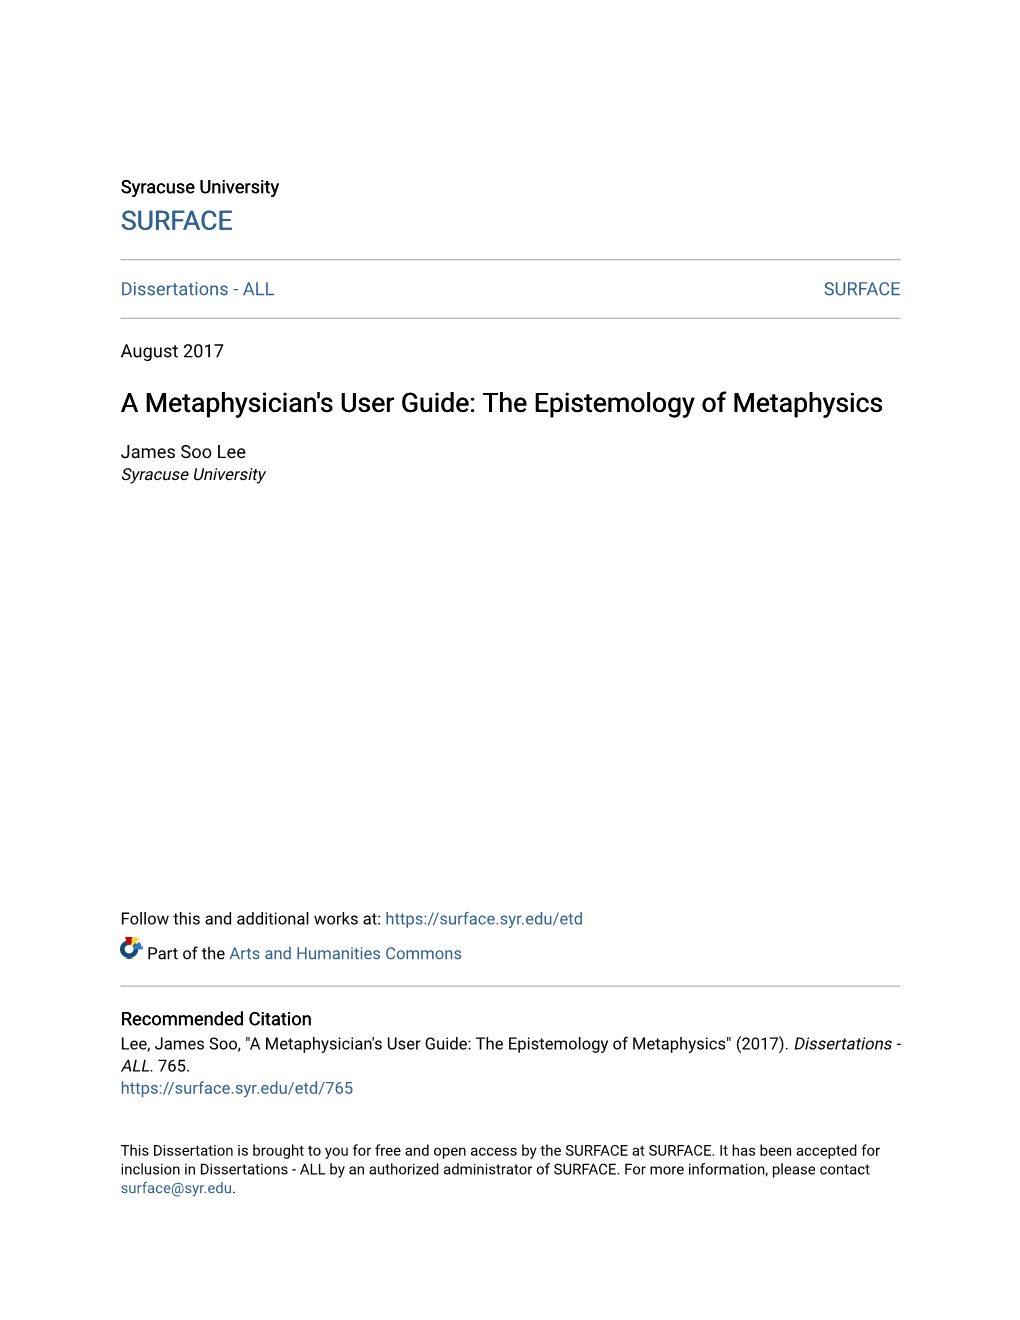 A Metaphysician's User Guide: the Epistemology of Metaphysics